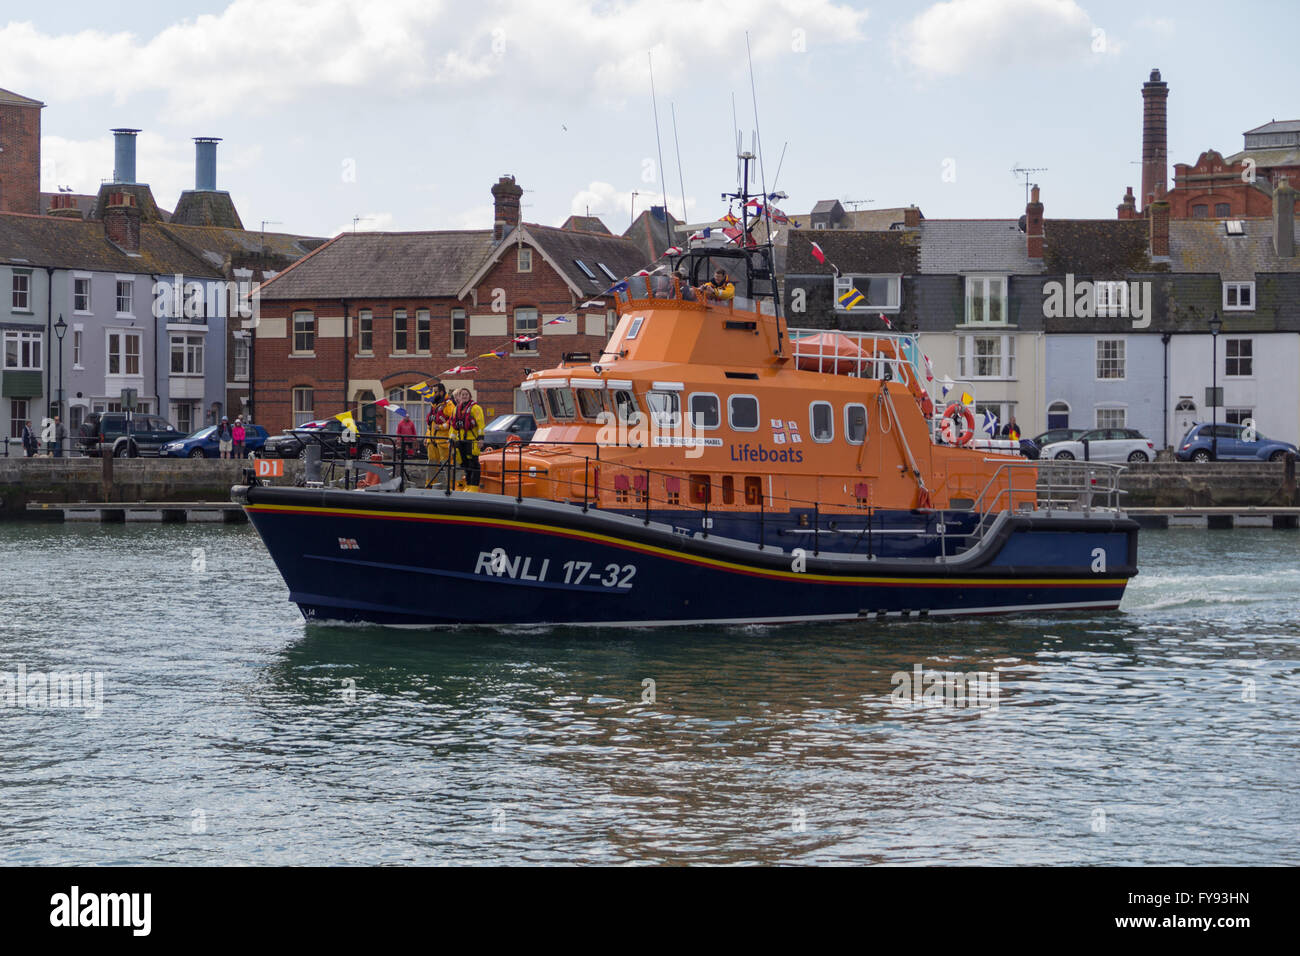 Weymouth, England. 23 April 2016. Queen's 90th Birthday Floating Tribute. RNLI Lifeboat Returning. Credit:  Frances Underwood/Alamy Live News Stock Photo